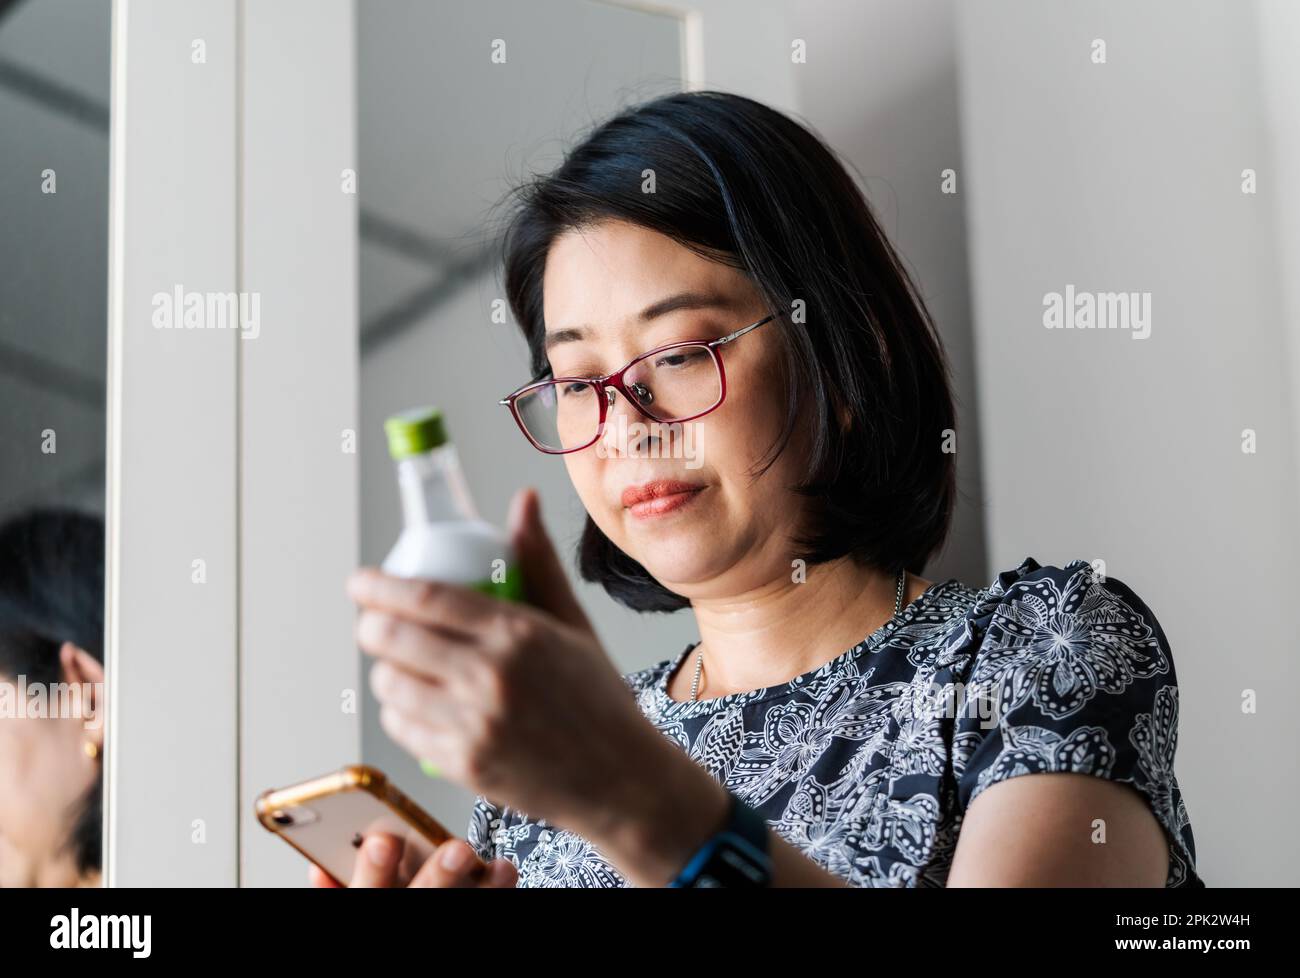 Asian woman is reading medicine information from her smartphone, her hand is holding a liquid medicine bottle, eyes looking at her cellphone. Asian mi Stock Photo